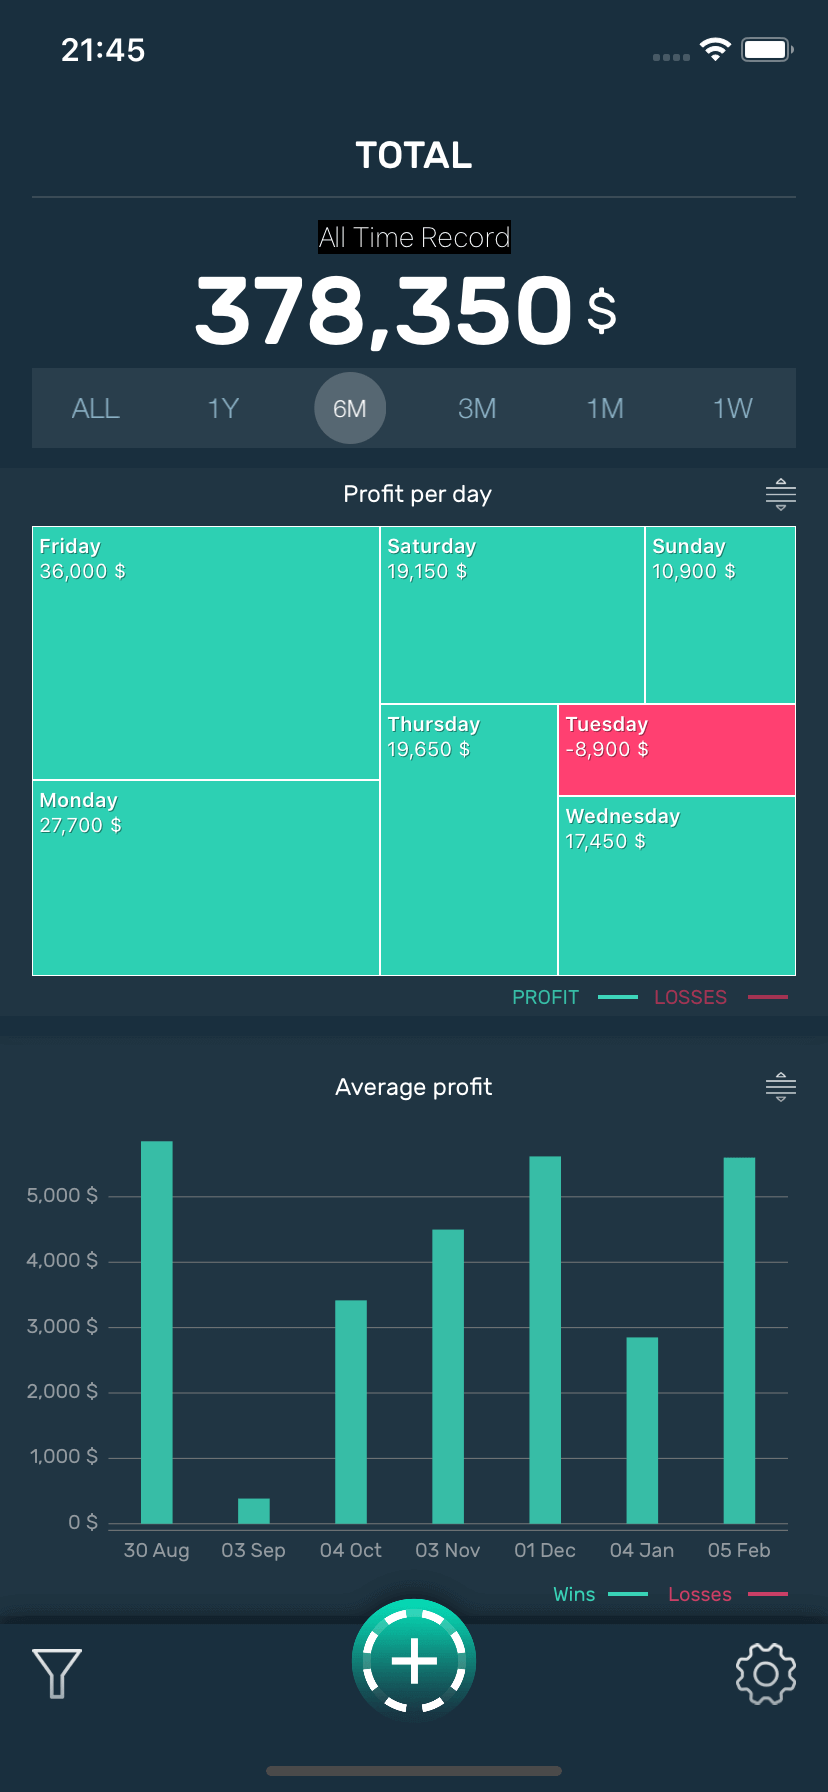 Insight into poker profits and losses displayed by day, week, month, and year in Poker Stack.